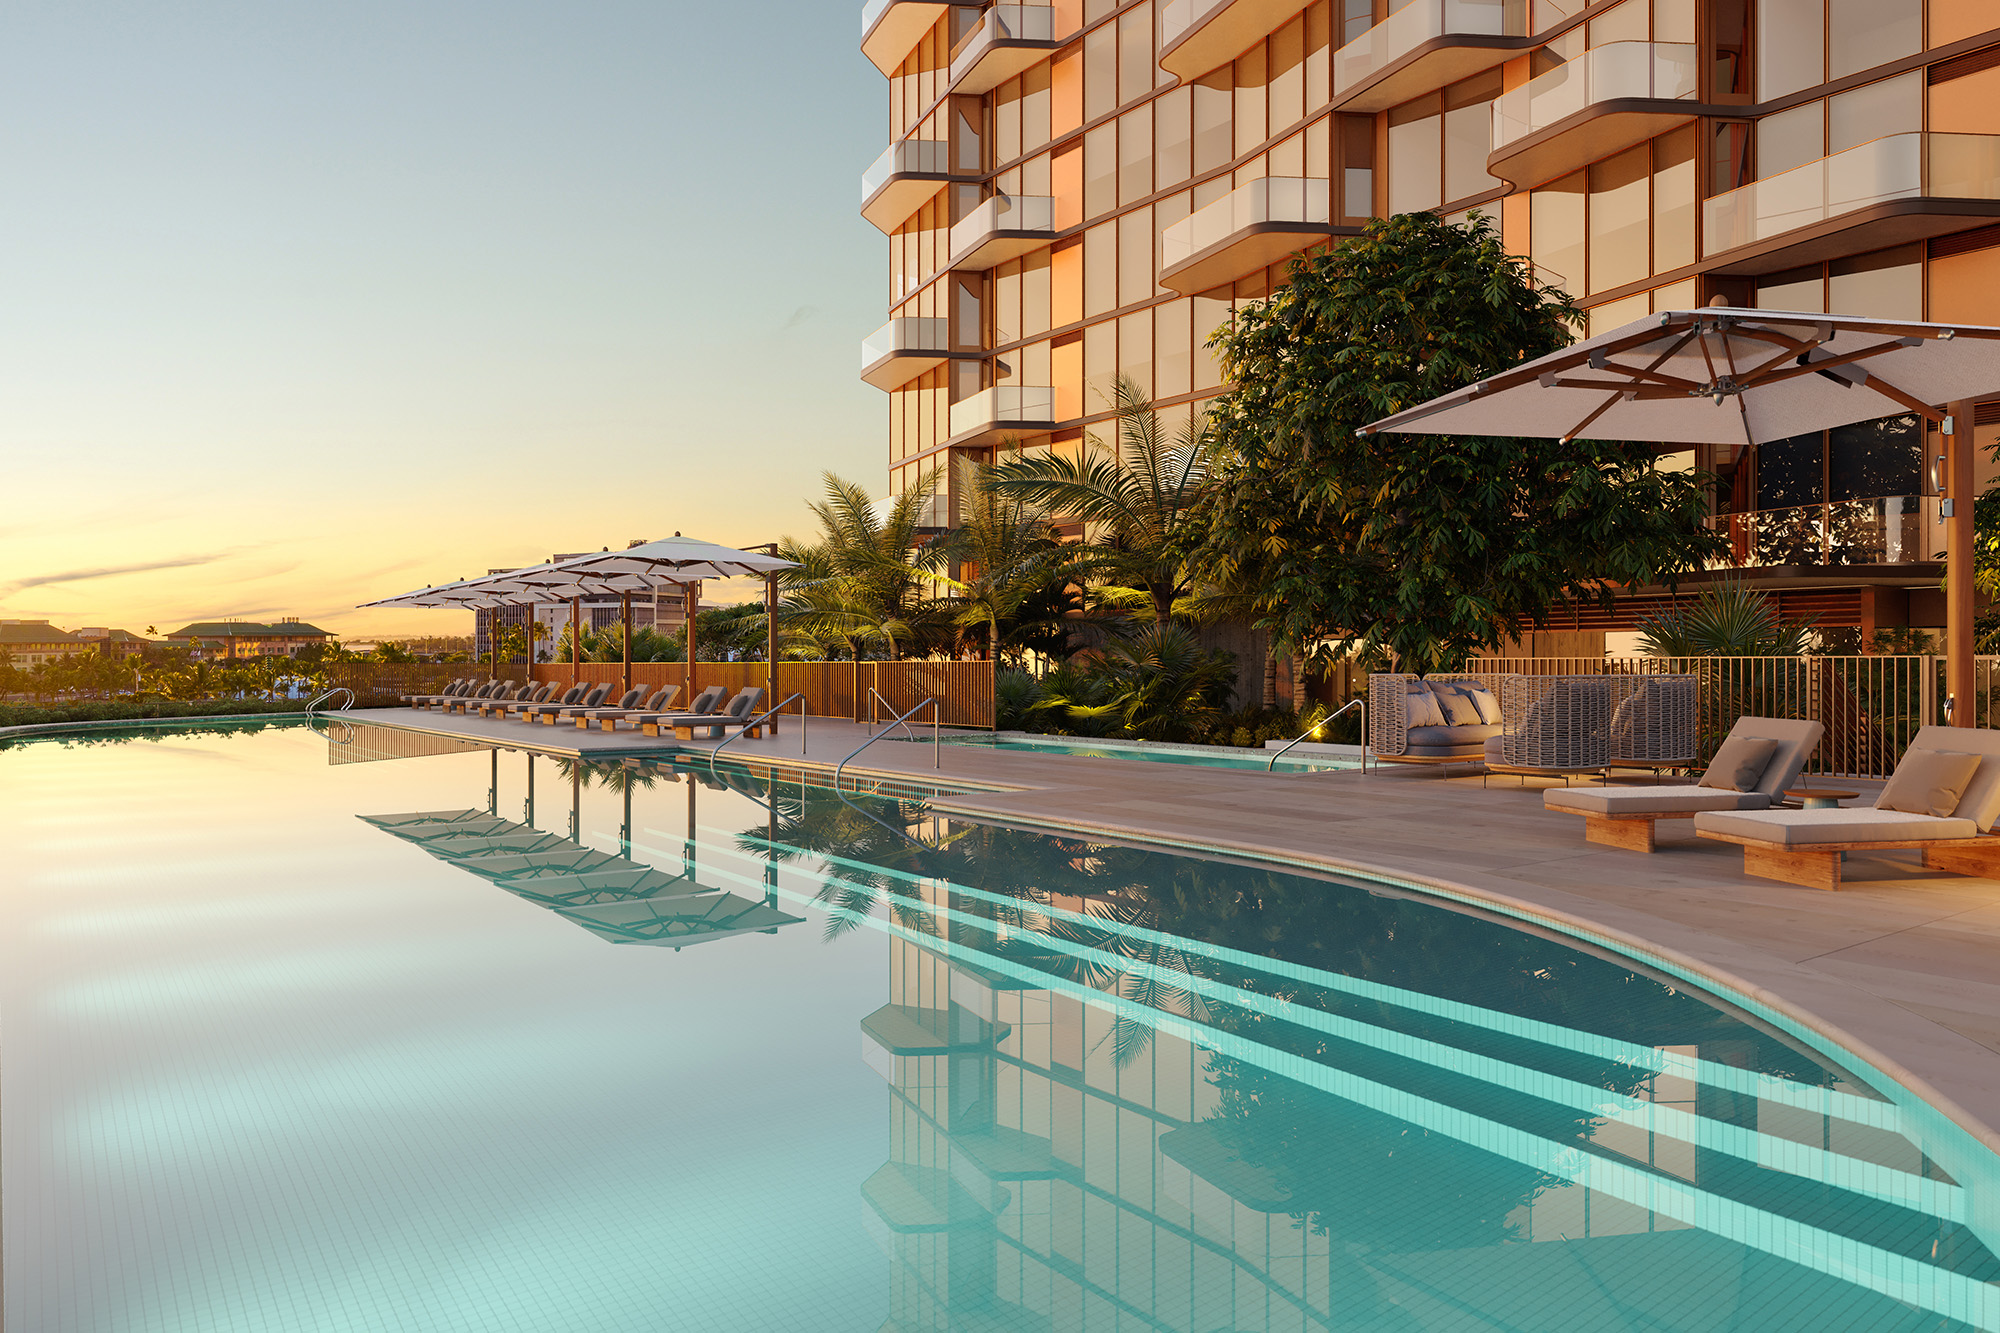 Swimming pool and sun deck amenity at dusk